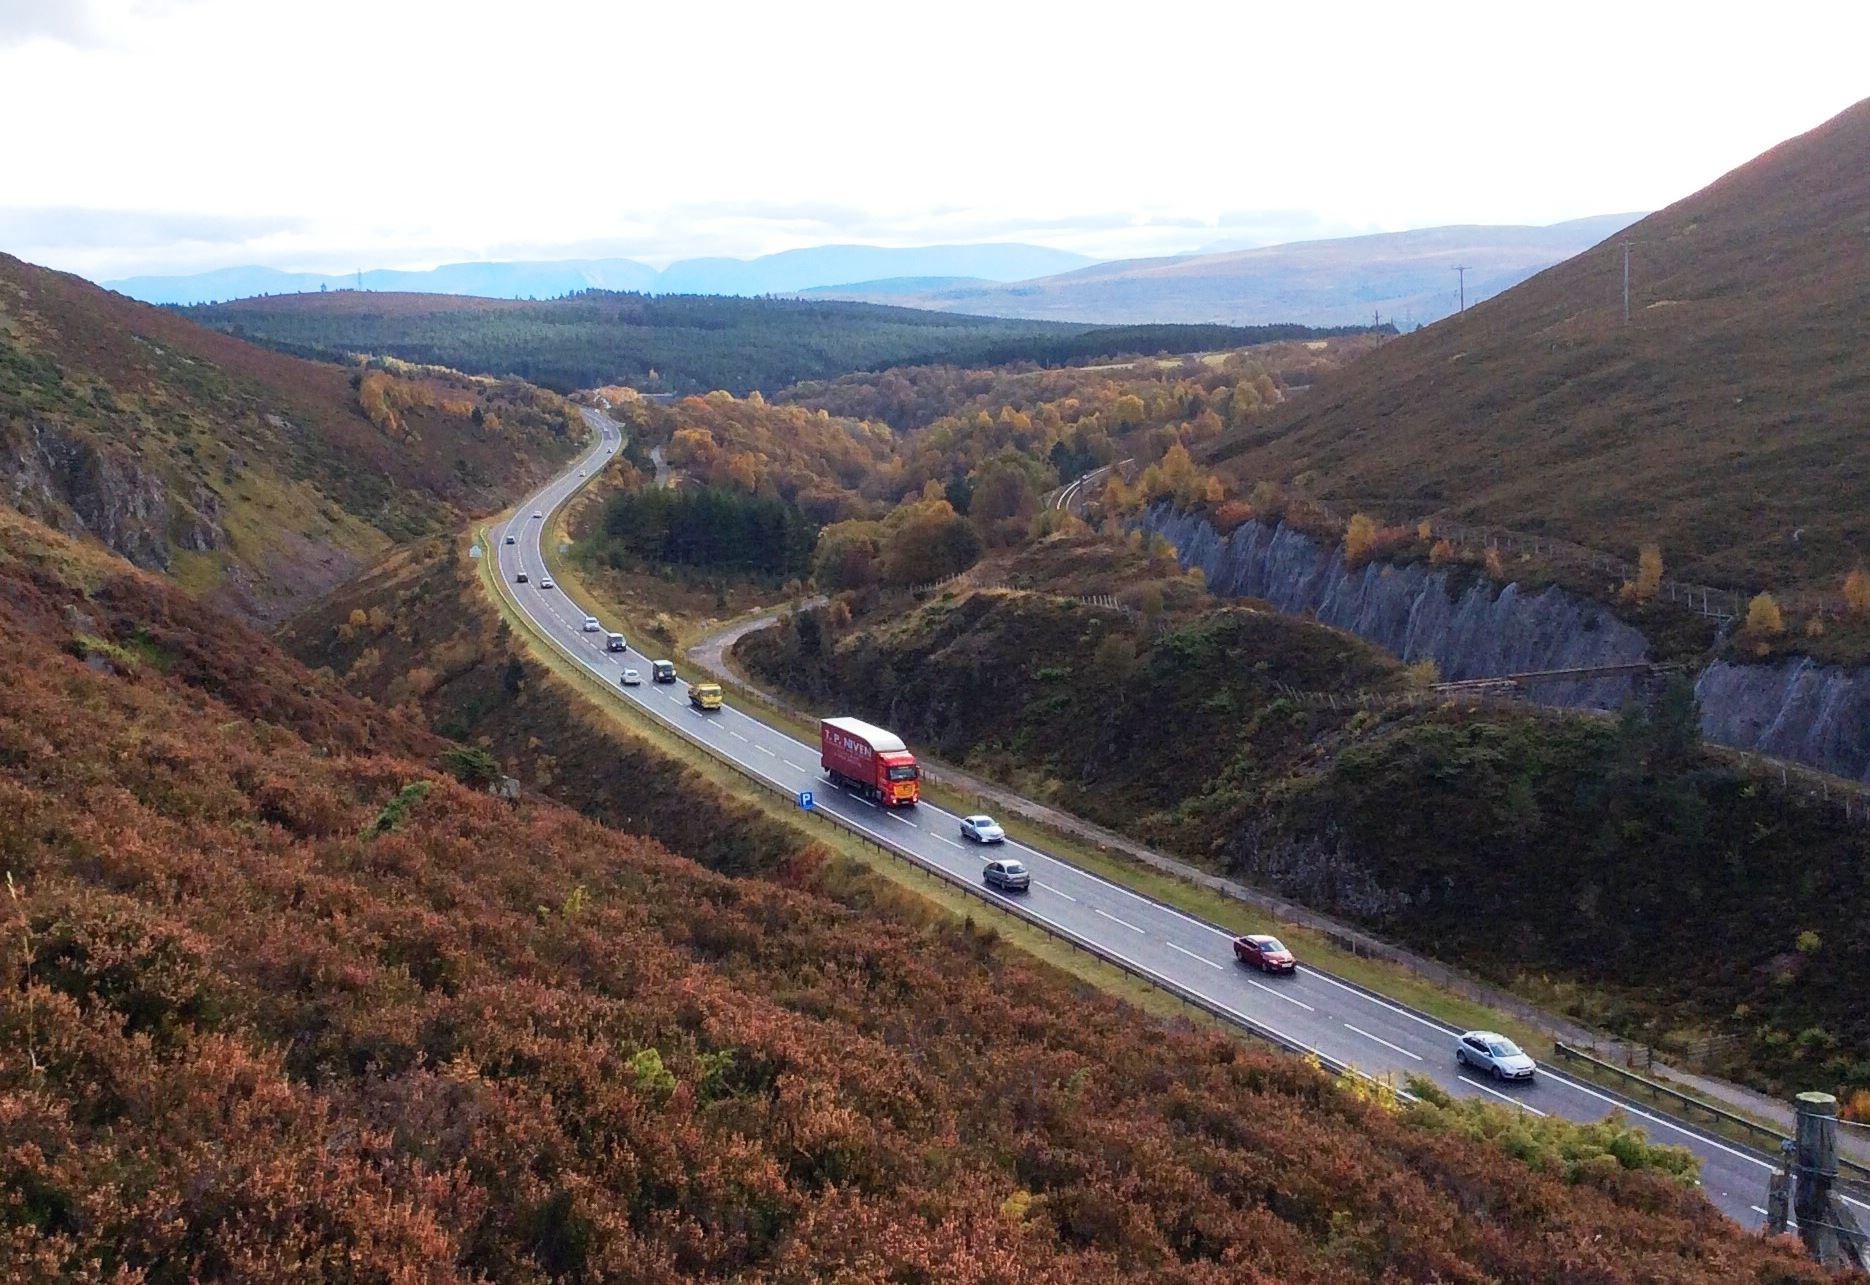 Motorists warned of A9 lane closures between Findhorn Viaduct and Slochd